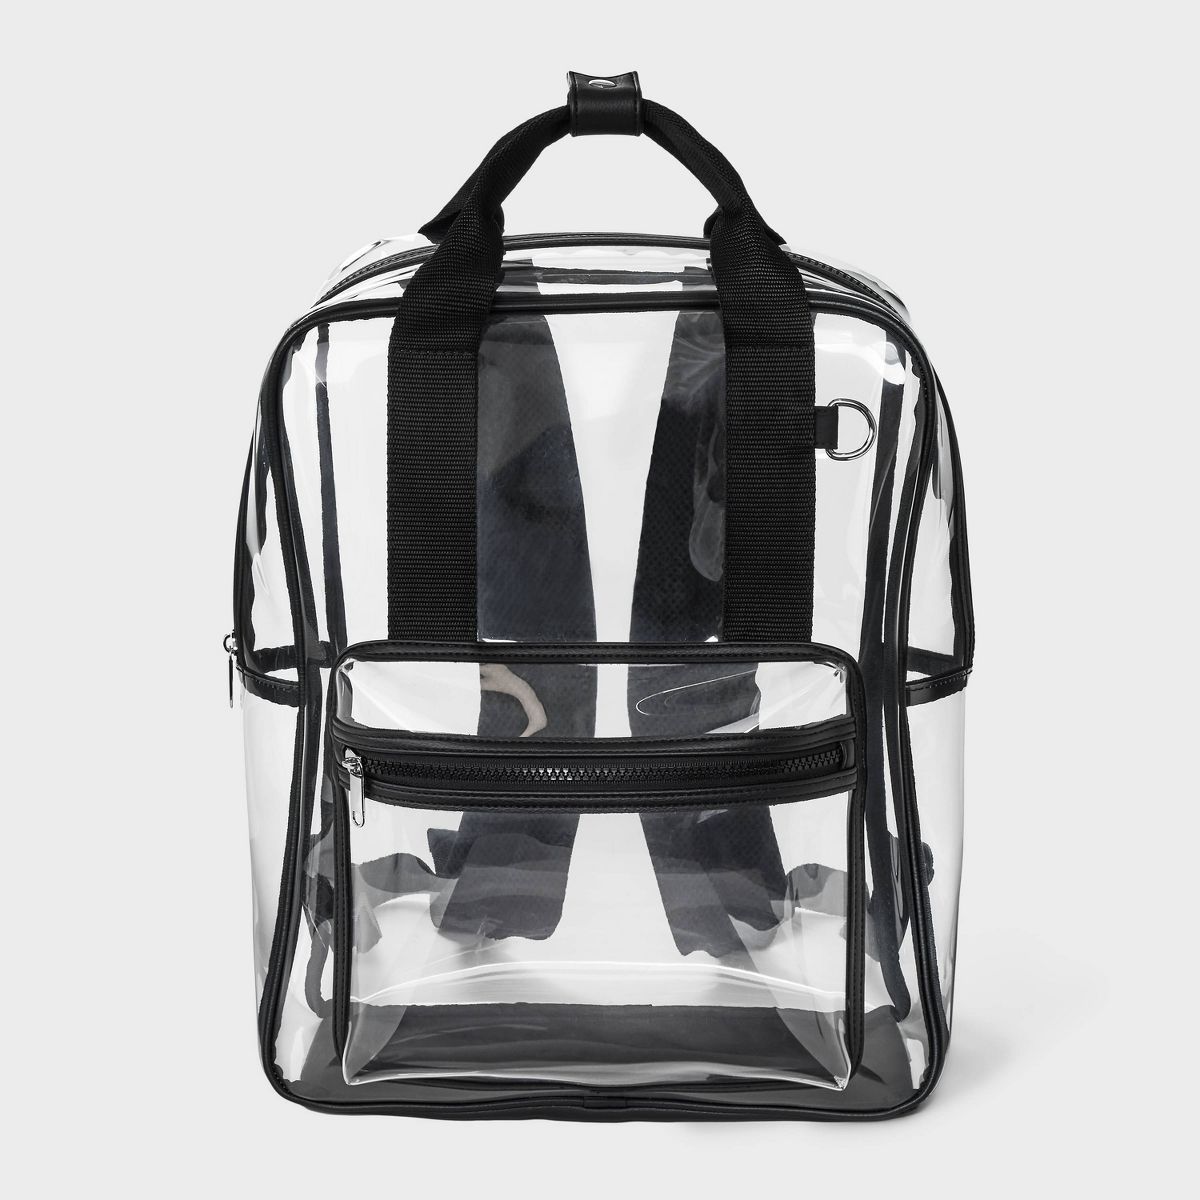 Square Backpack - Wild Fable™ | Target